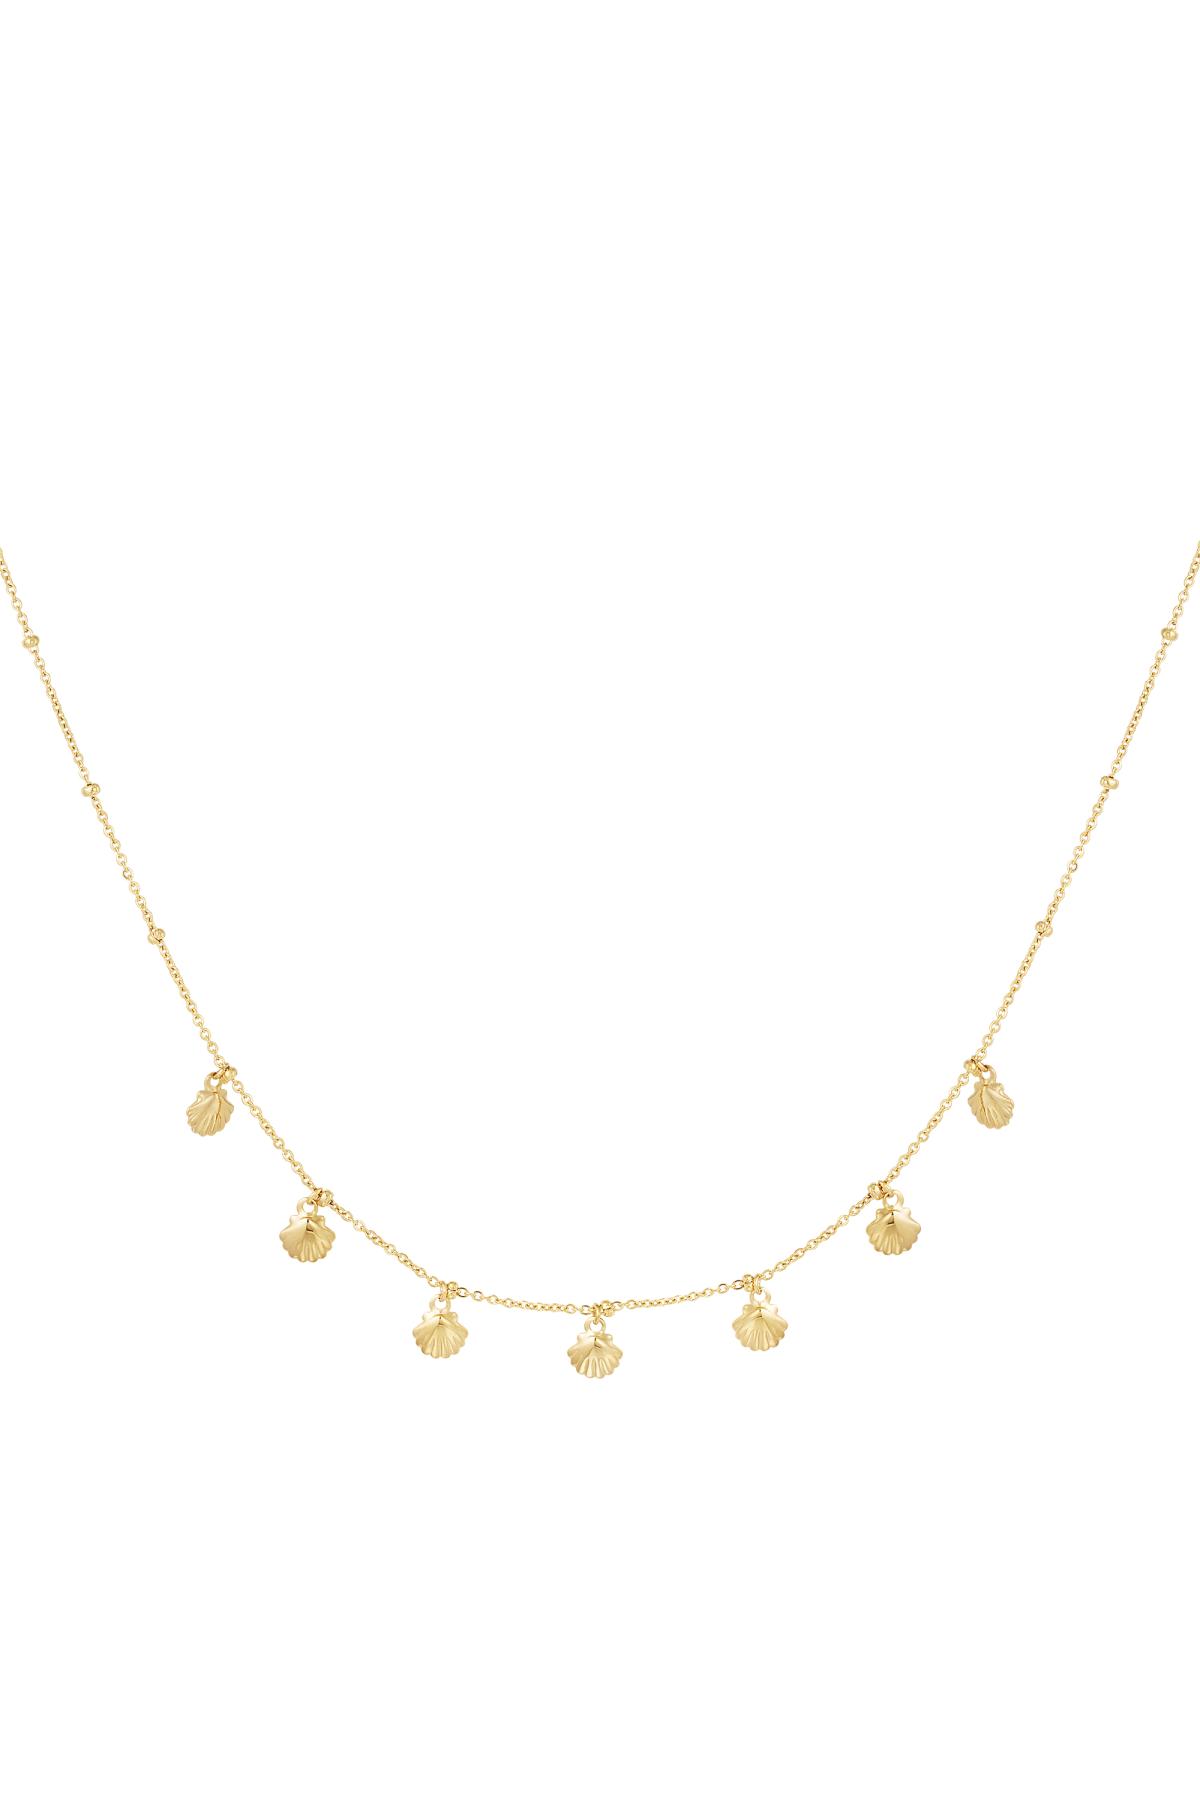 Dangling shells necklace - Beach collection Gold Stainless Steel